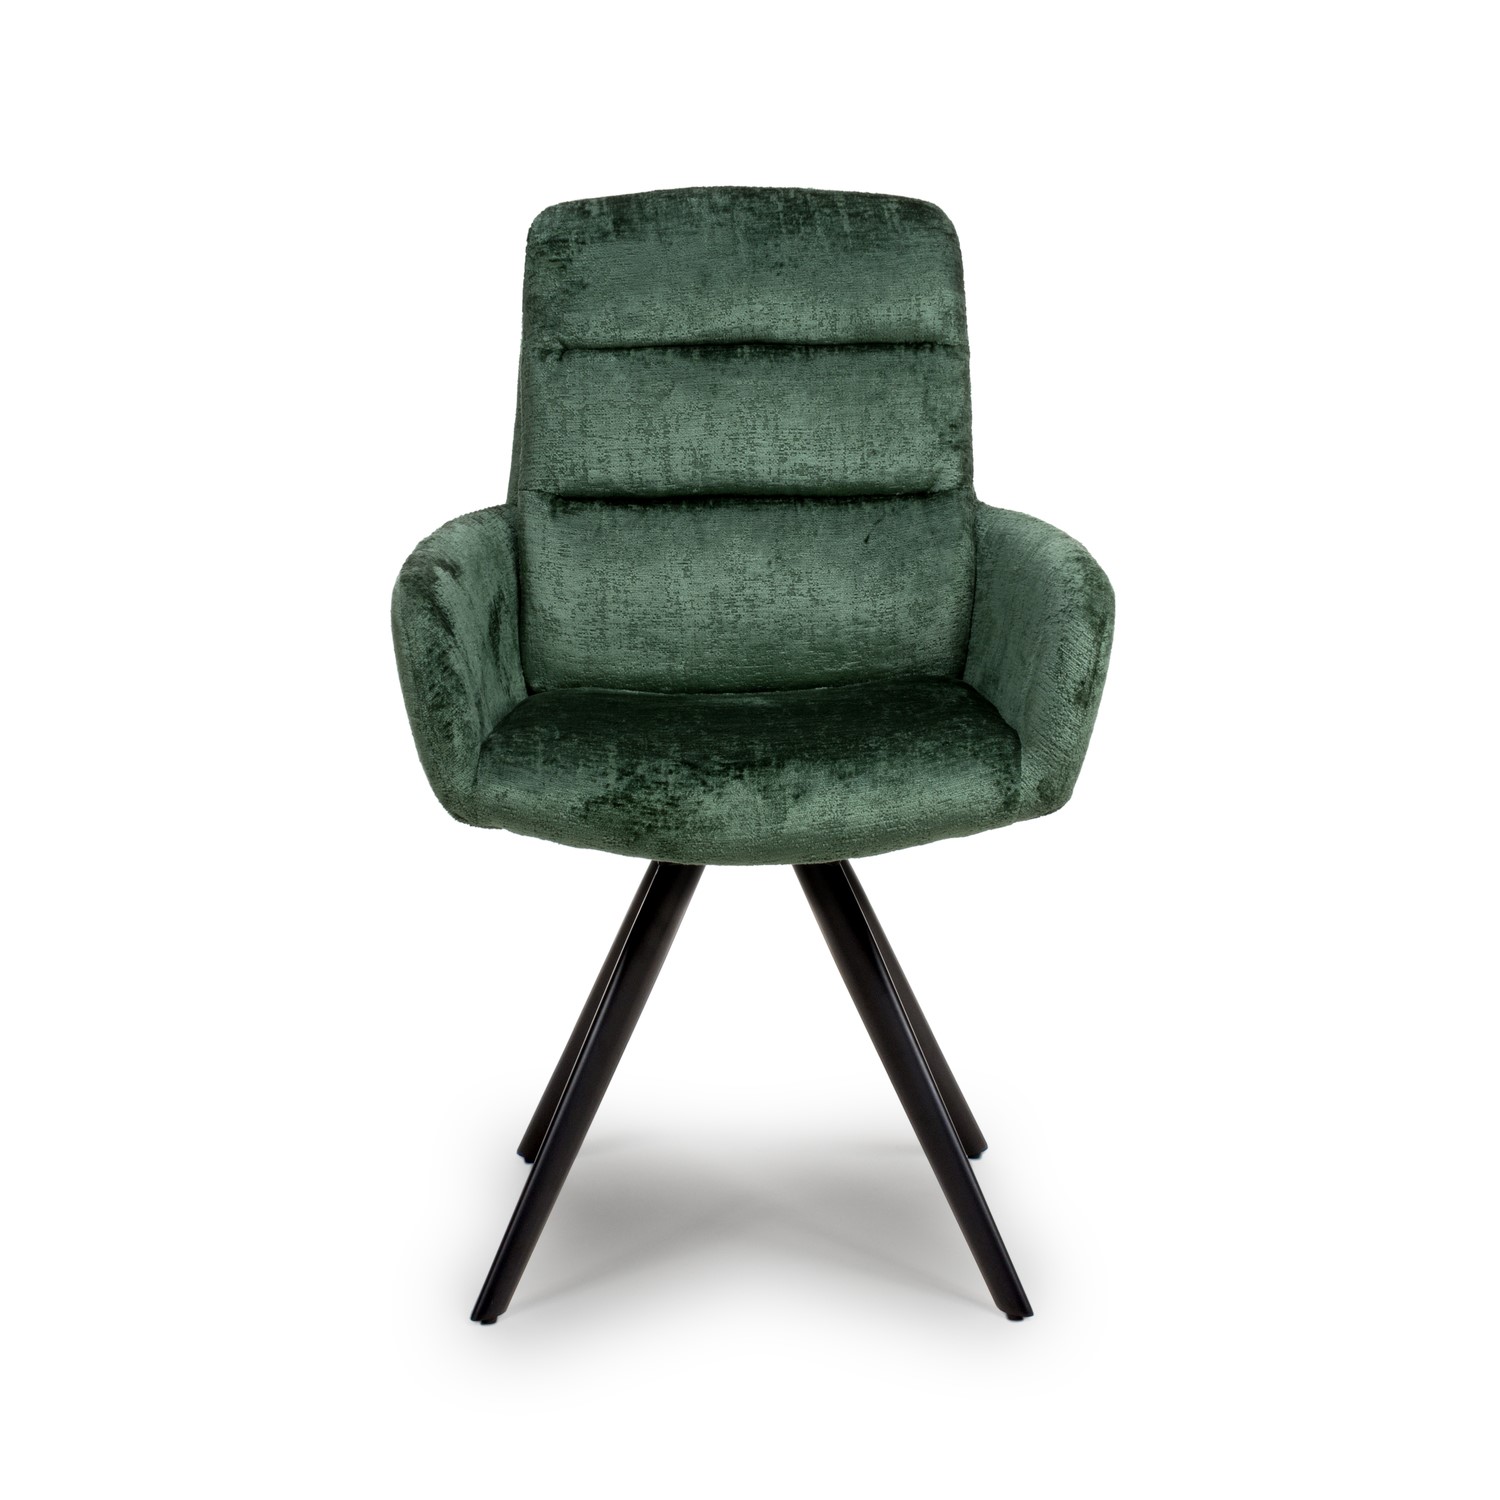 Photo of Set of 2 green swivel dining chairs -devan